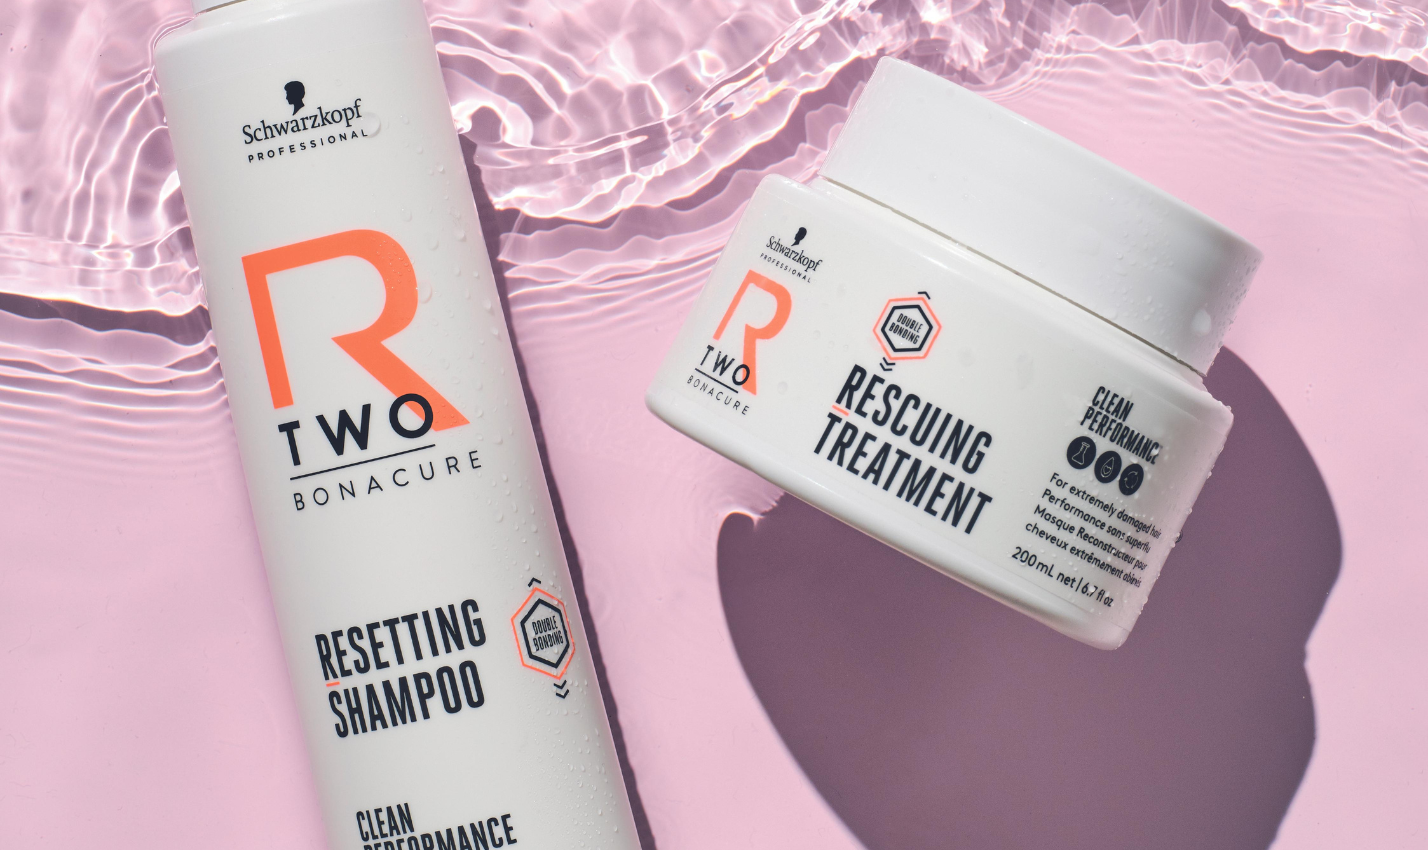 Schwarzkopf r two products